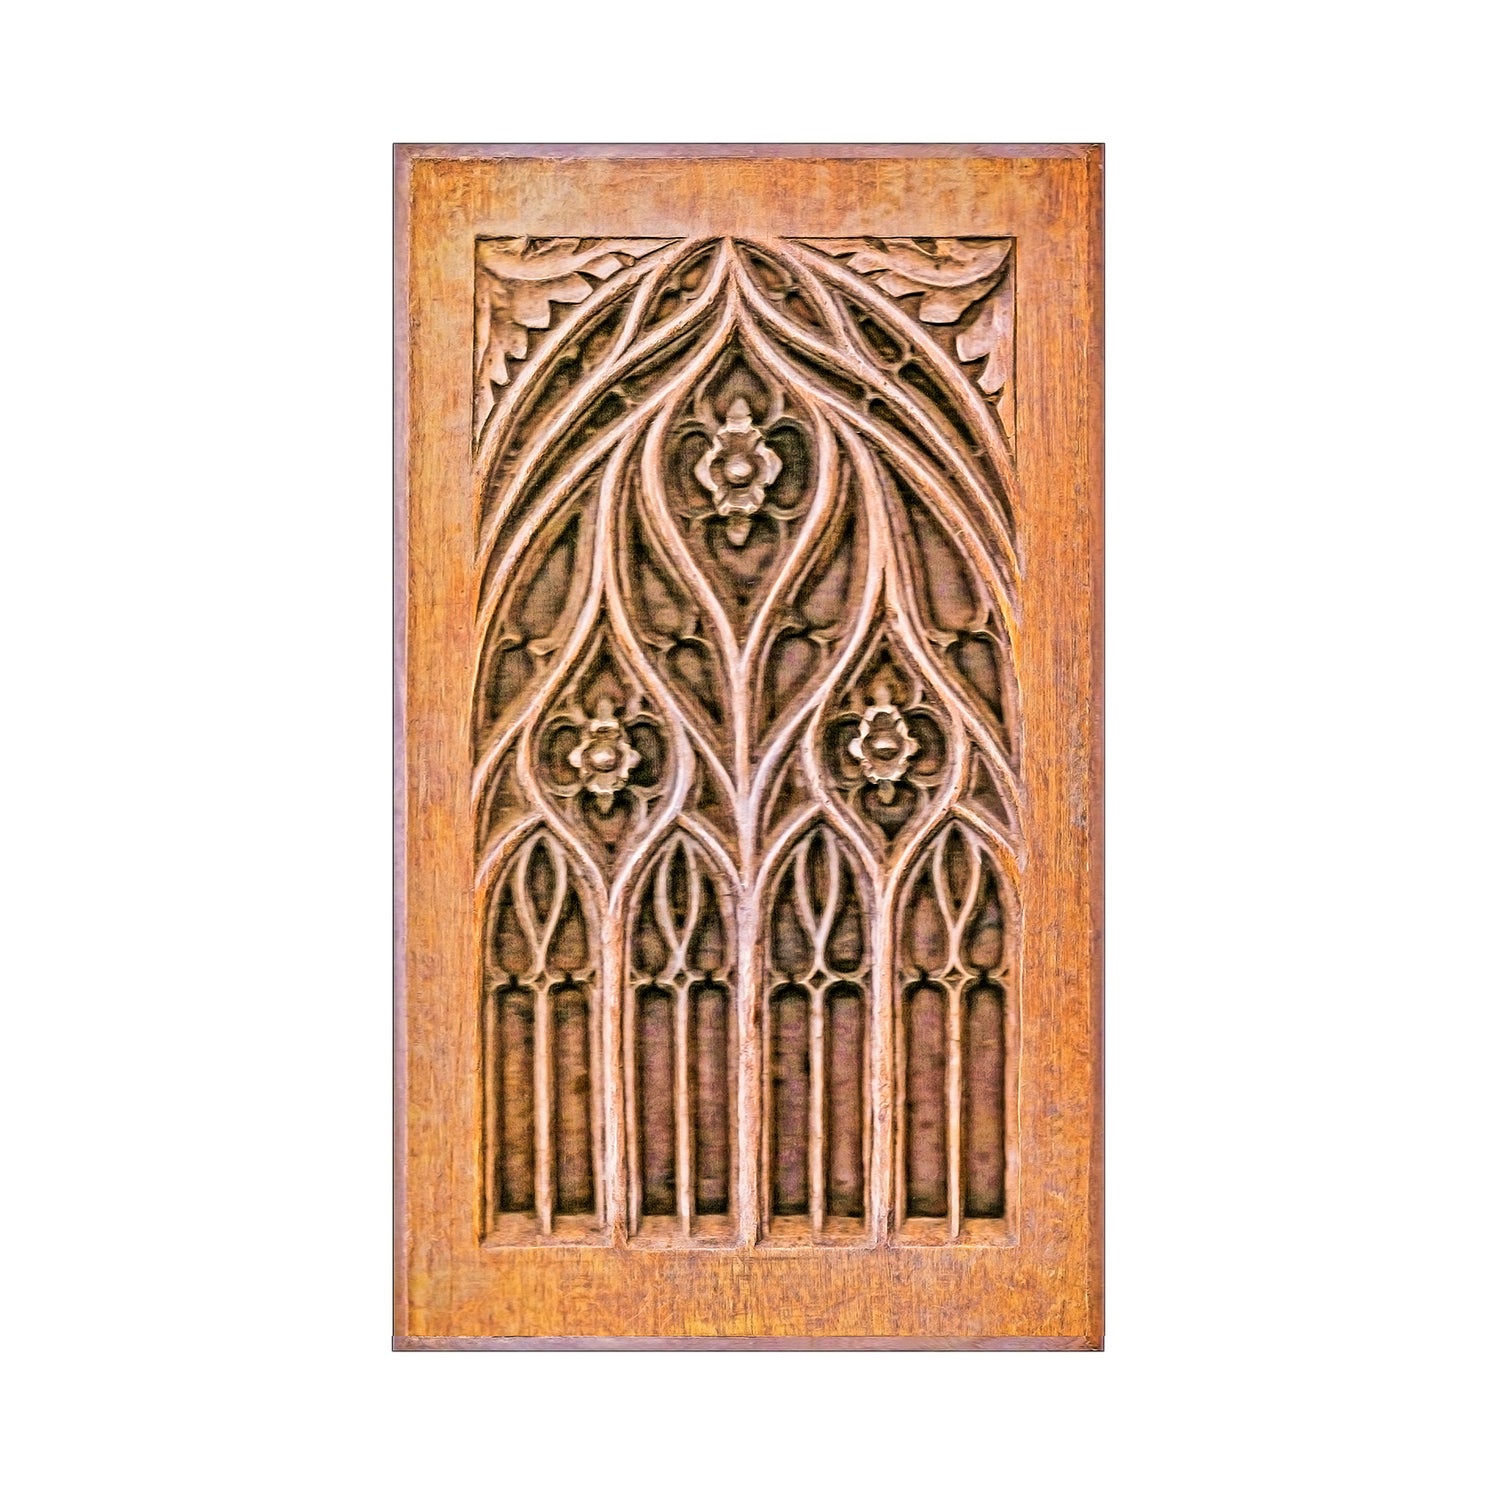 PAIR of PNL-50 Delicate Wood Carved Gothic Door Panels, Furniture Panels, 13-1/2